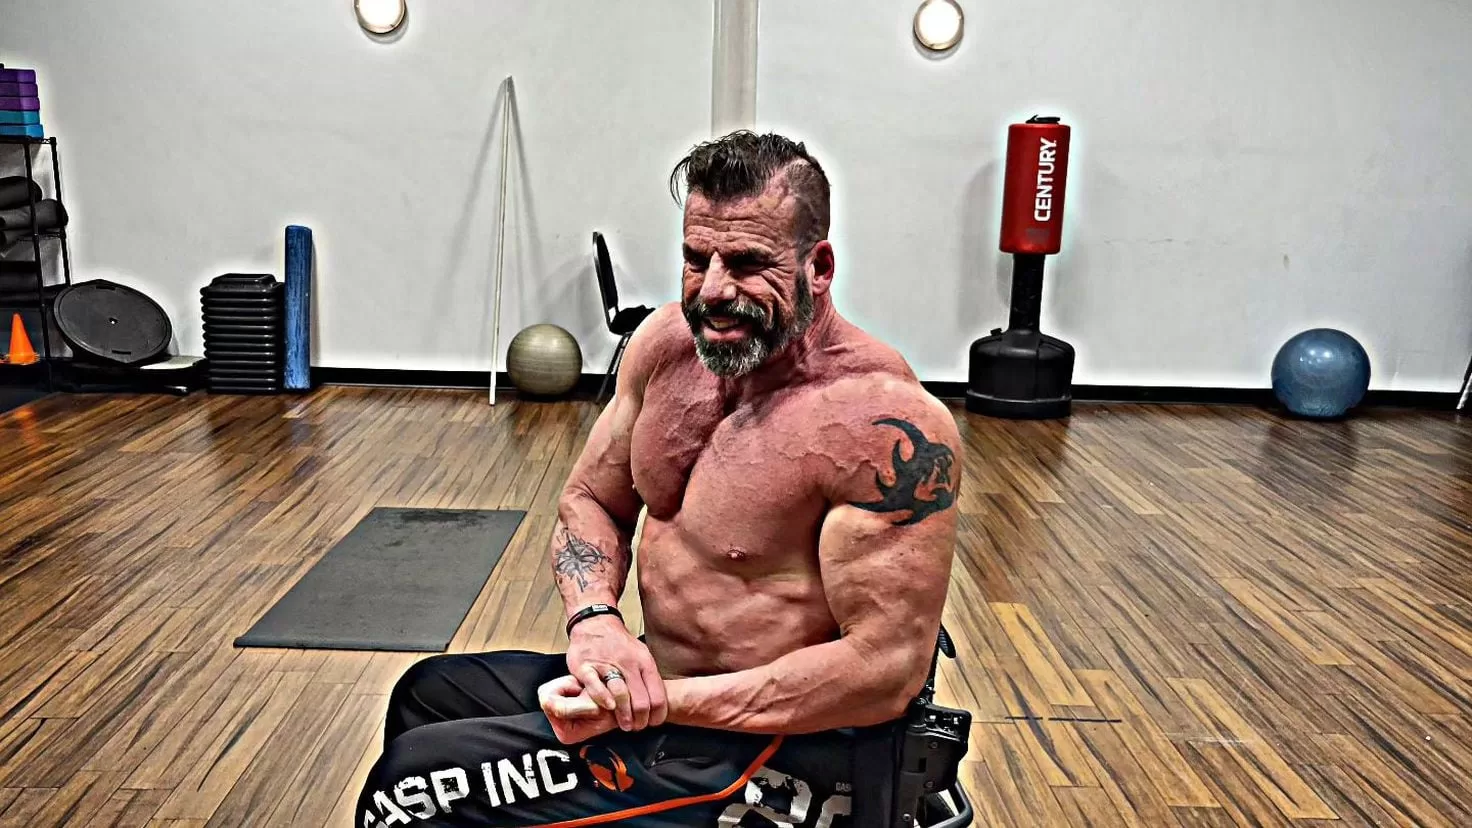 Chad McCrary, the bodybuilder who ended up in a wheelchair due to an accident, dies
